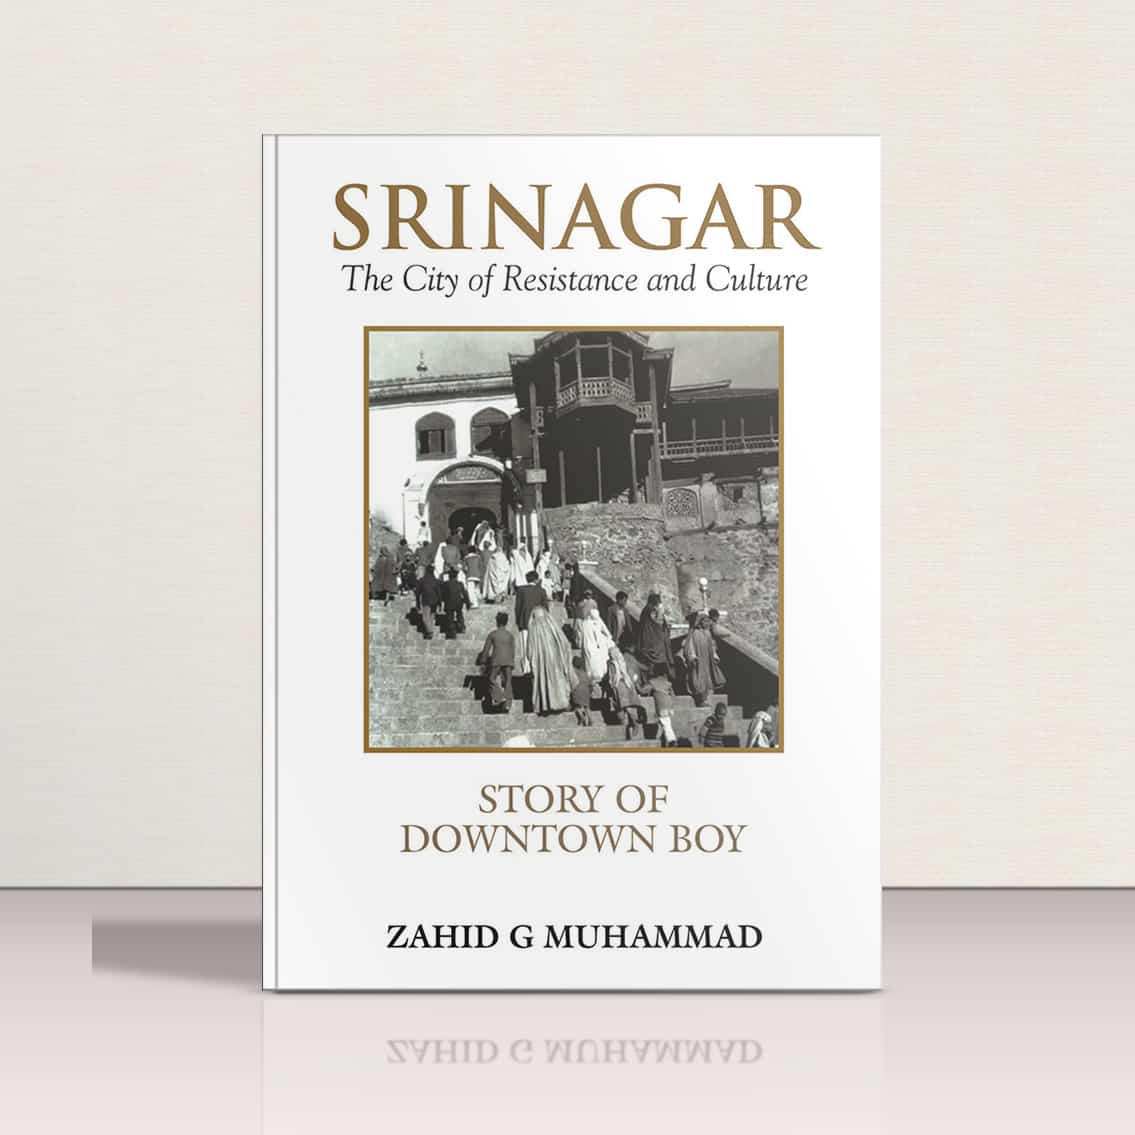 Srinagar-The City of Resistance & Culture by Zahid G Muhammad